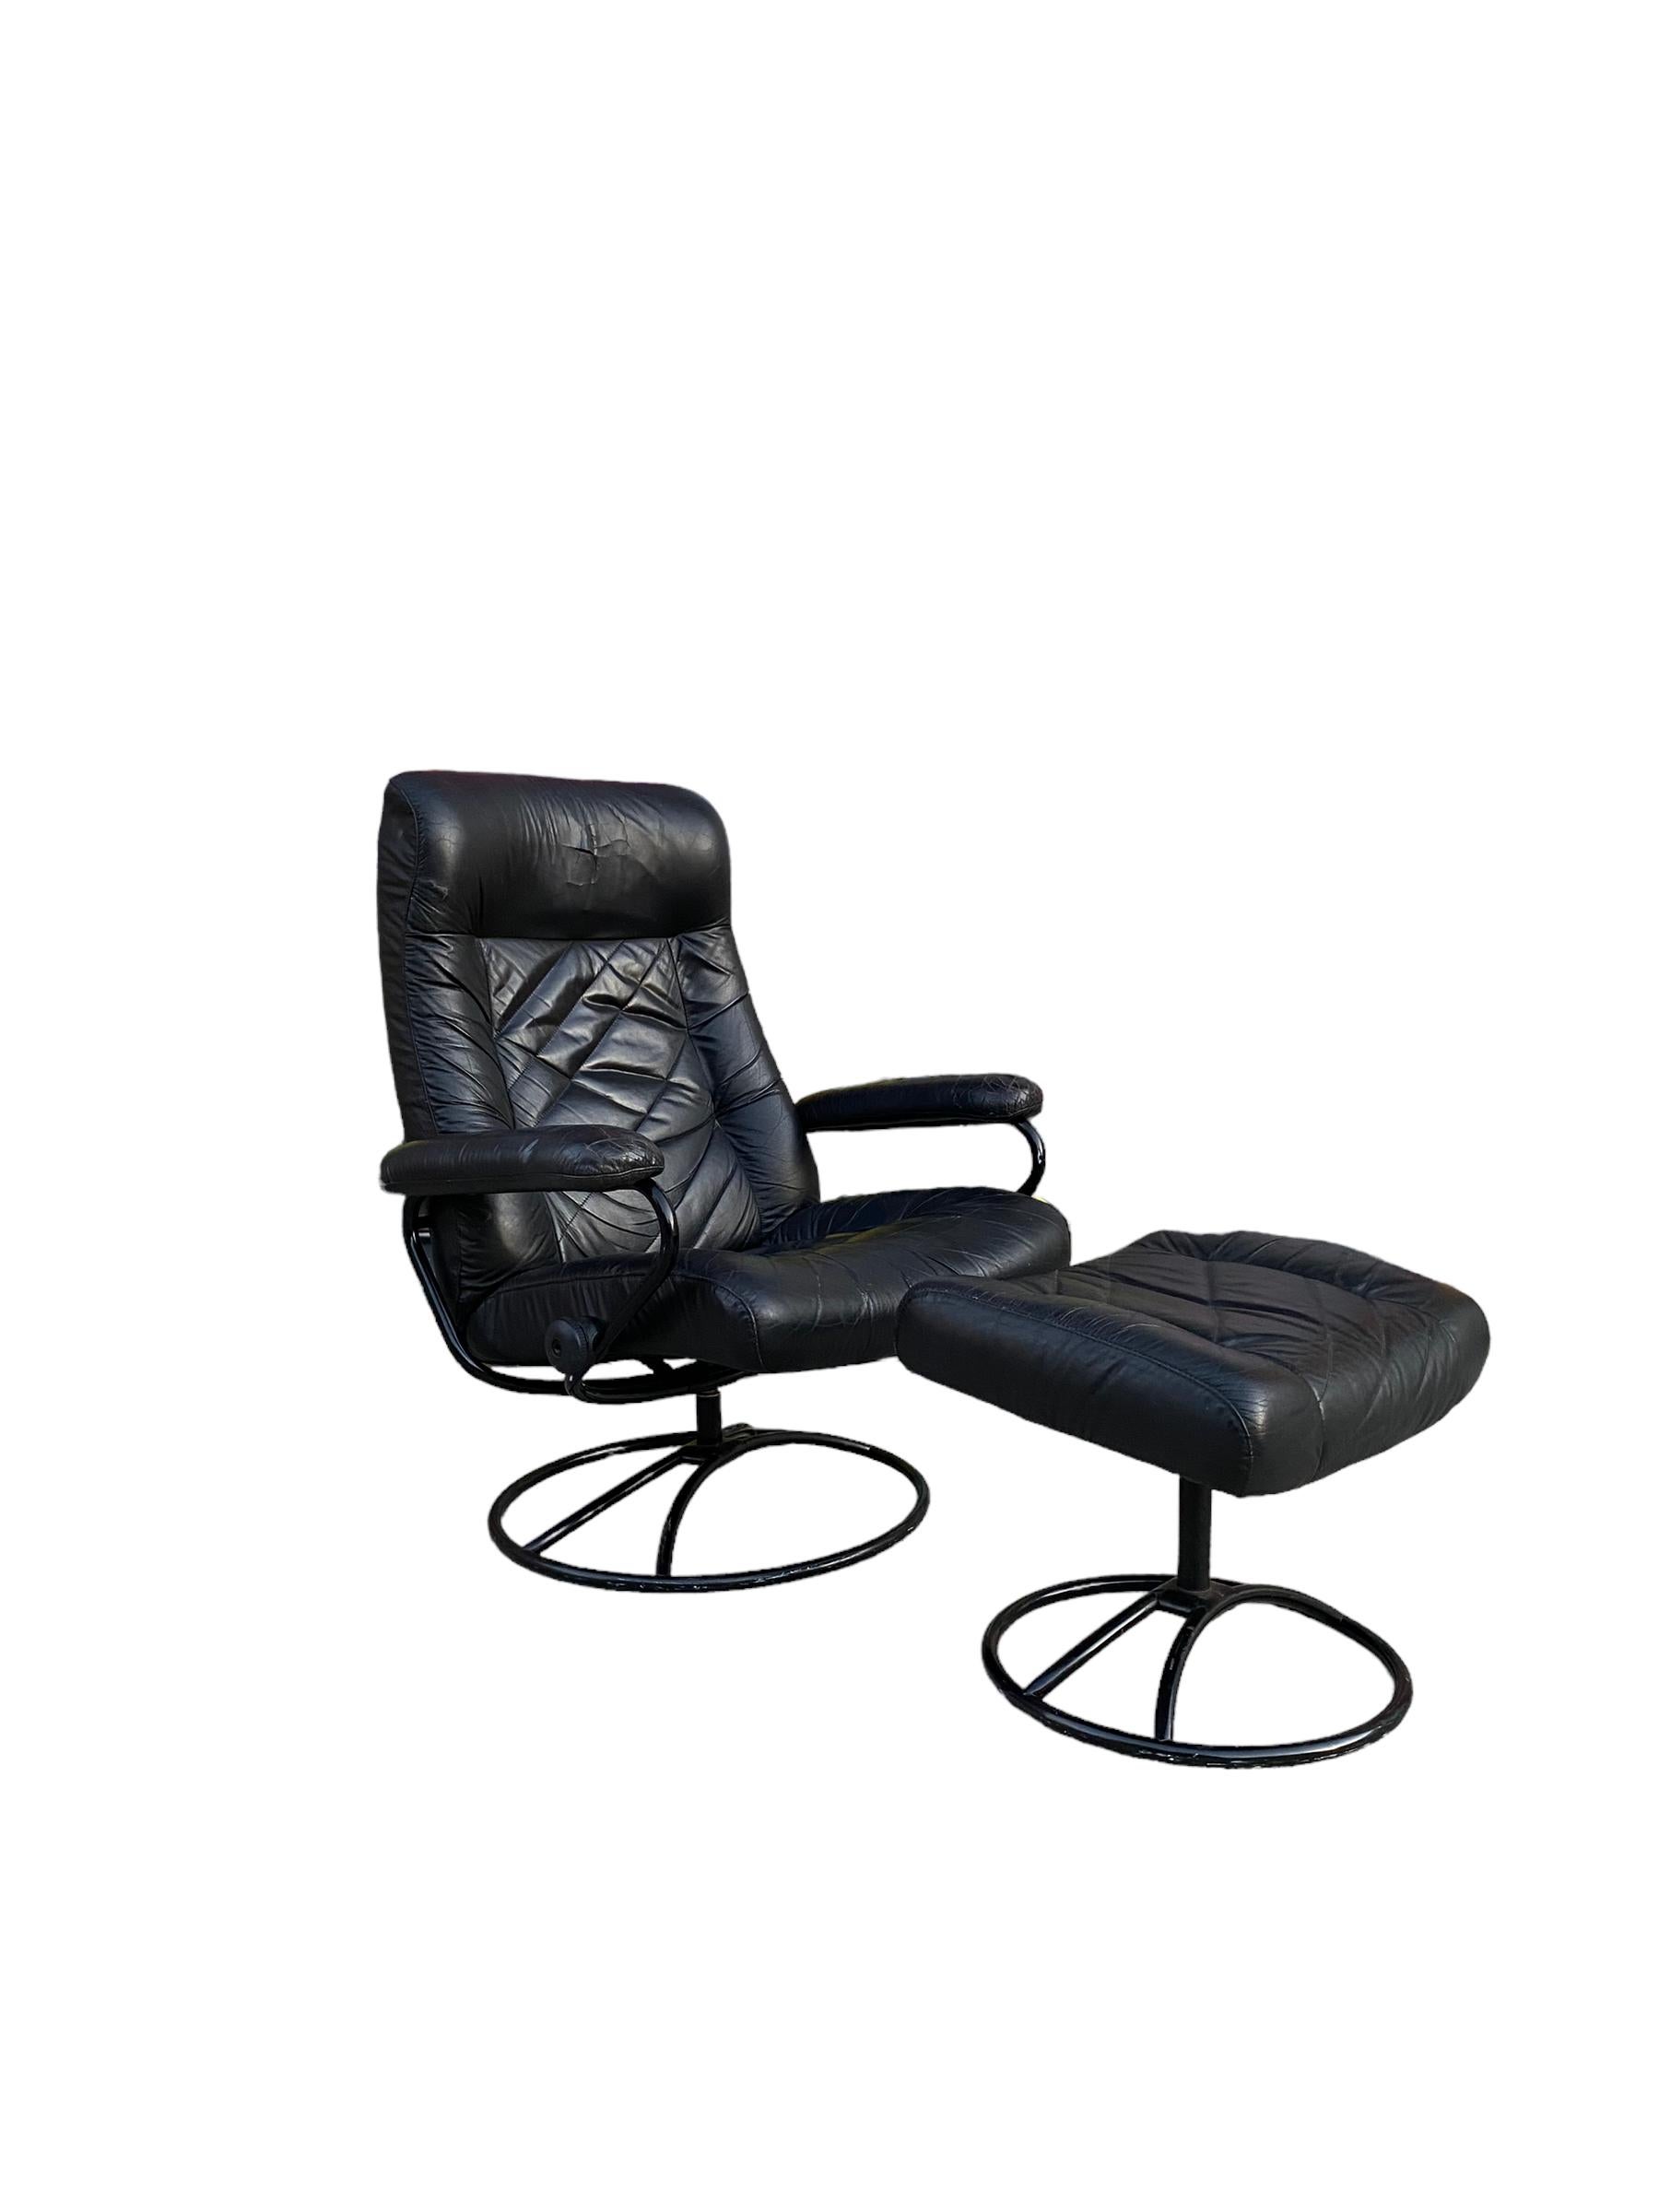 Ekornes Stressless Reclining Lounge Chair and Ottoman in Black For Sale 1